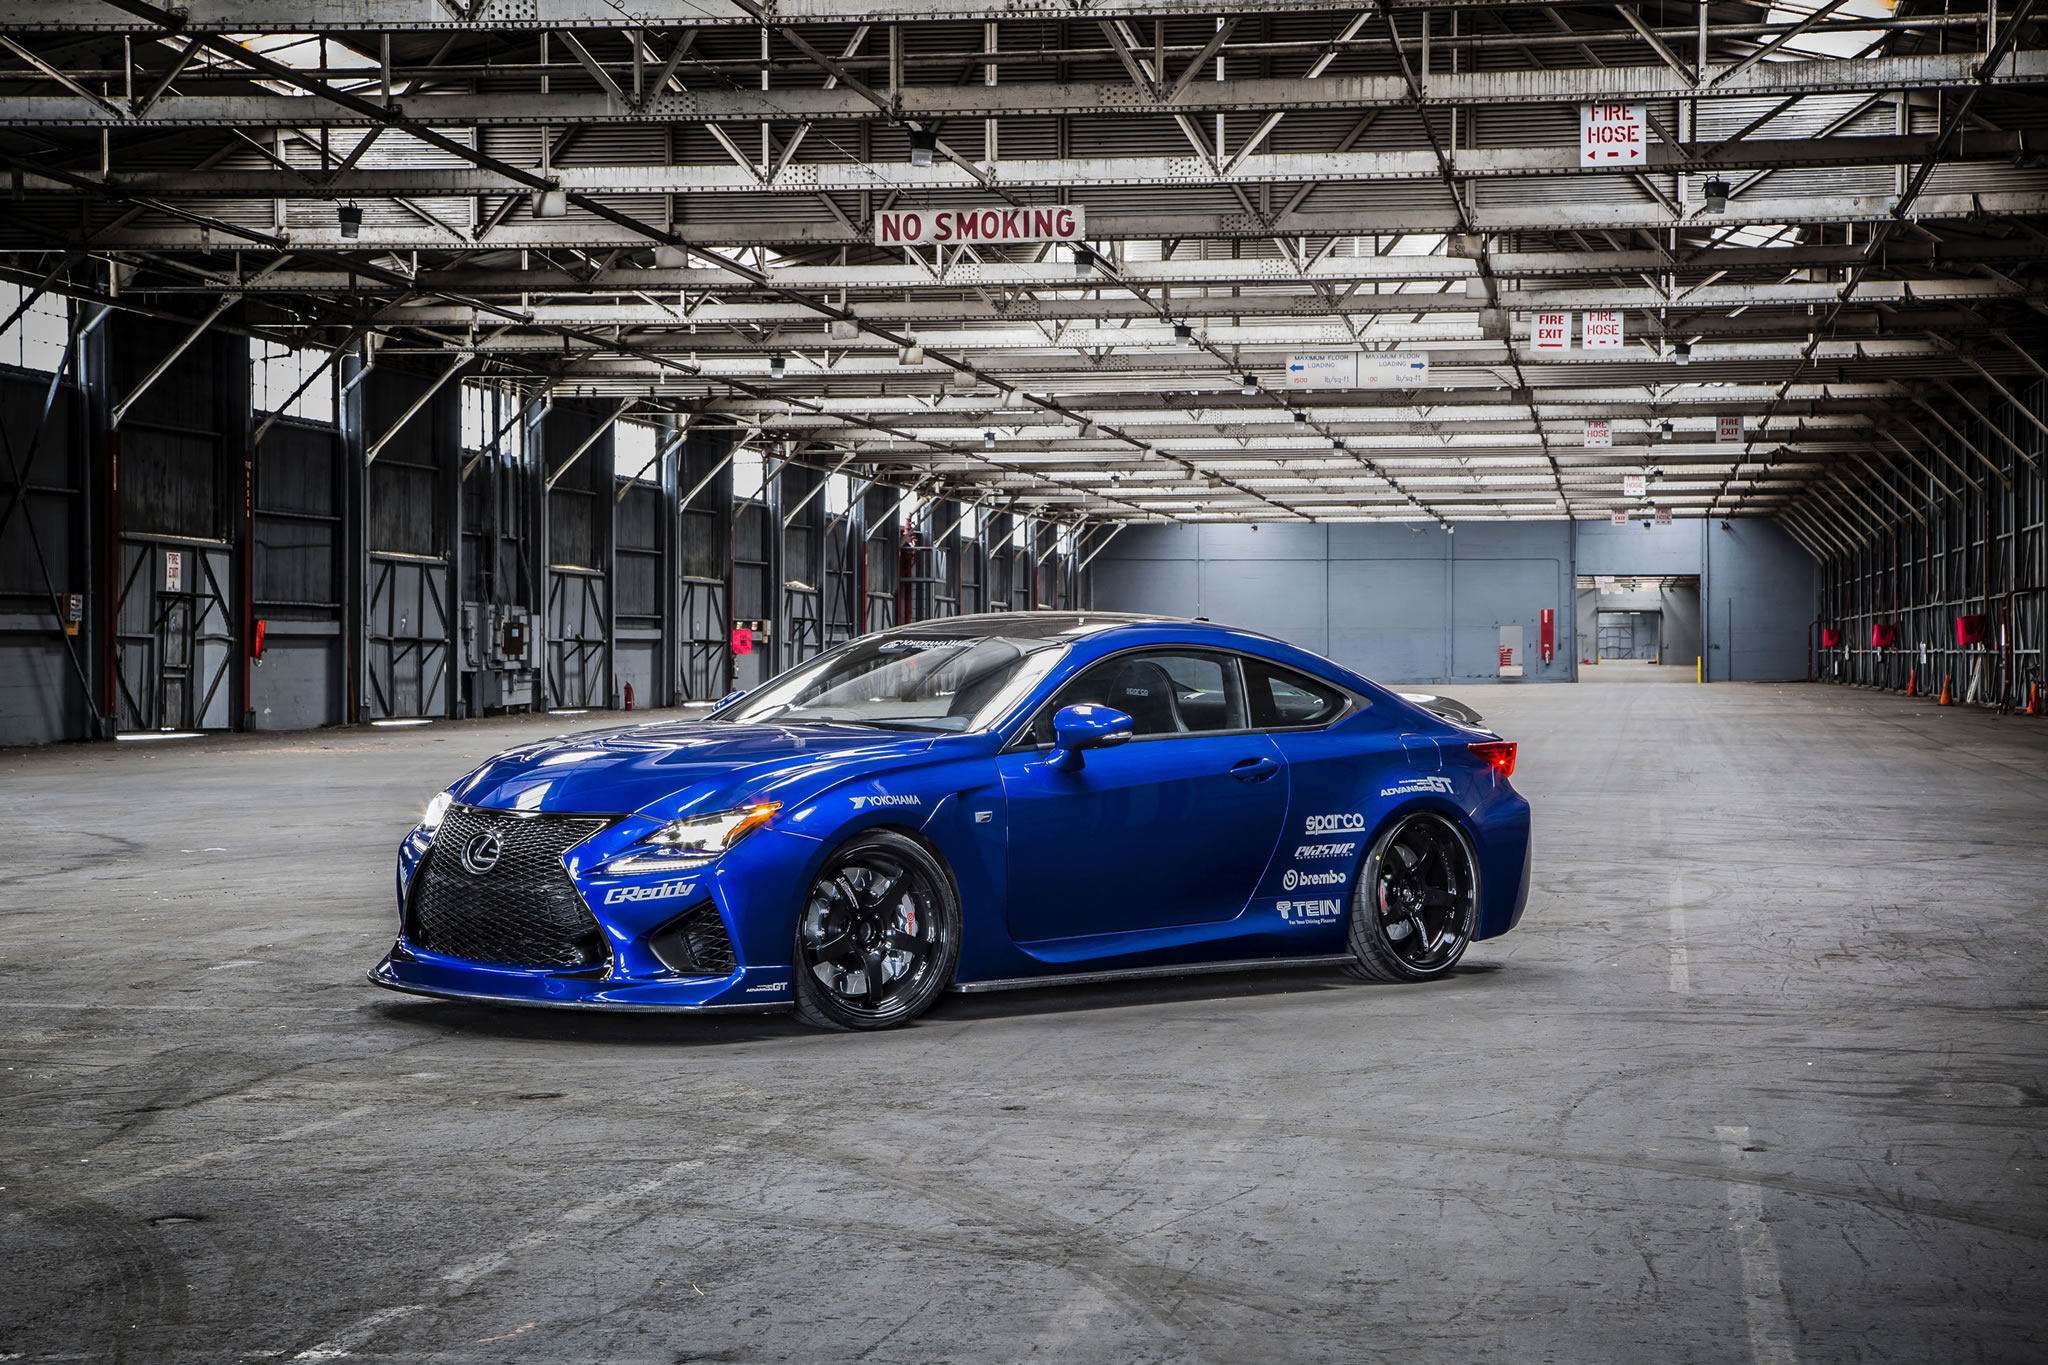 Lexus Rc F By Gordon Ting Front Photo Size X Nr